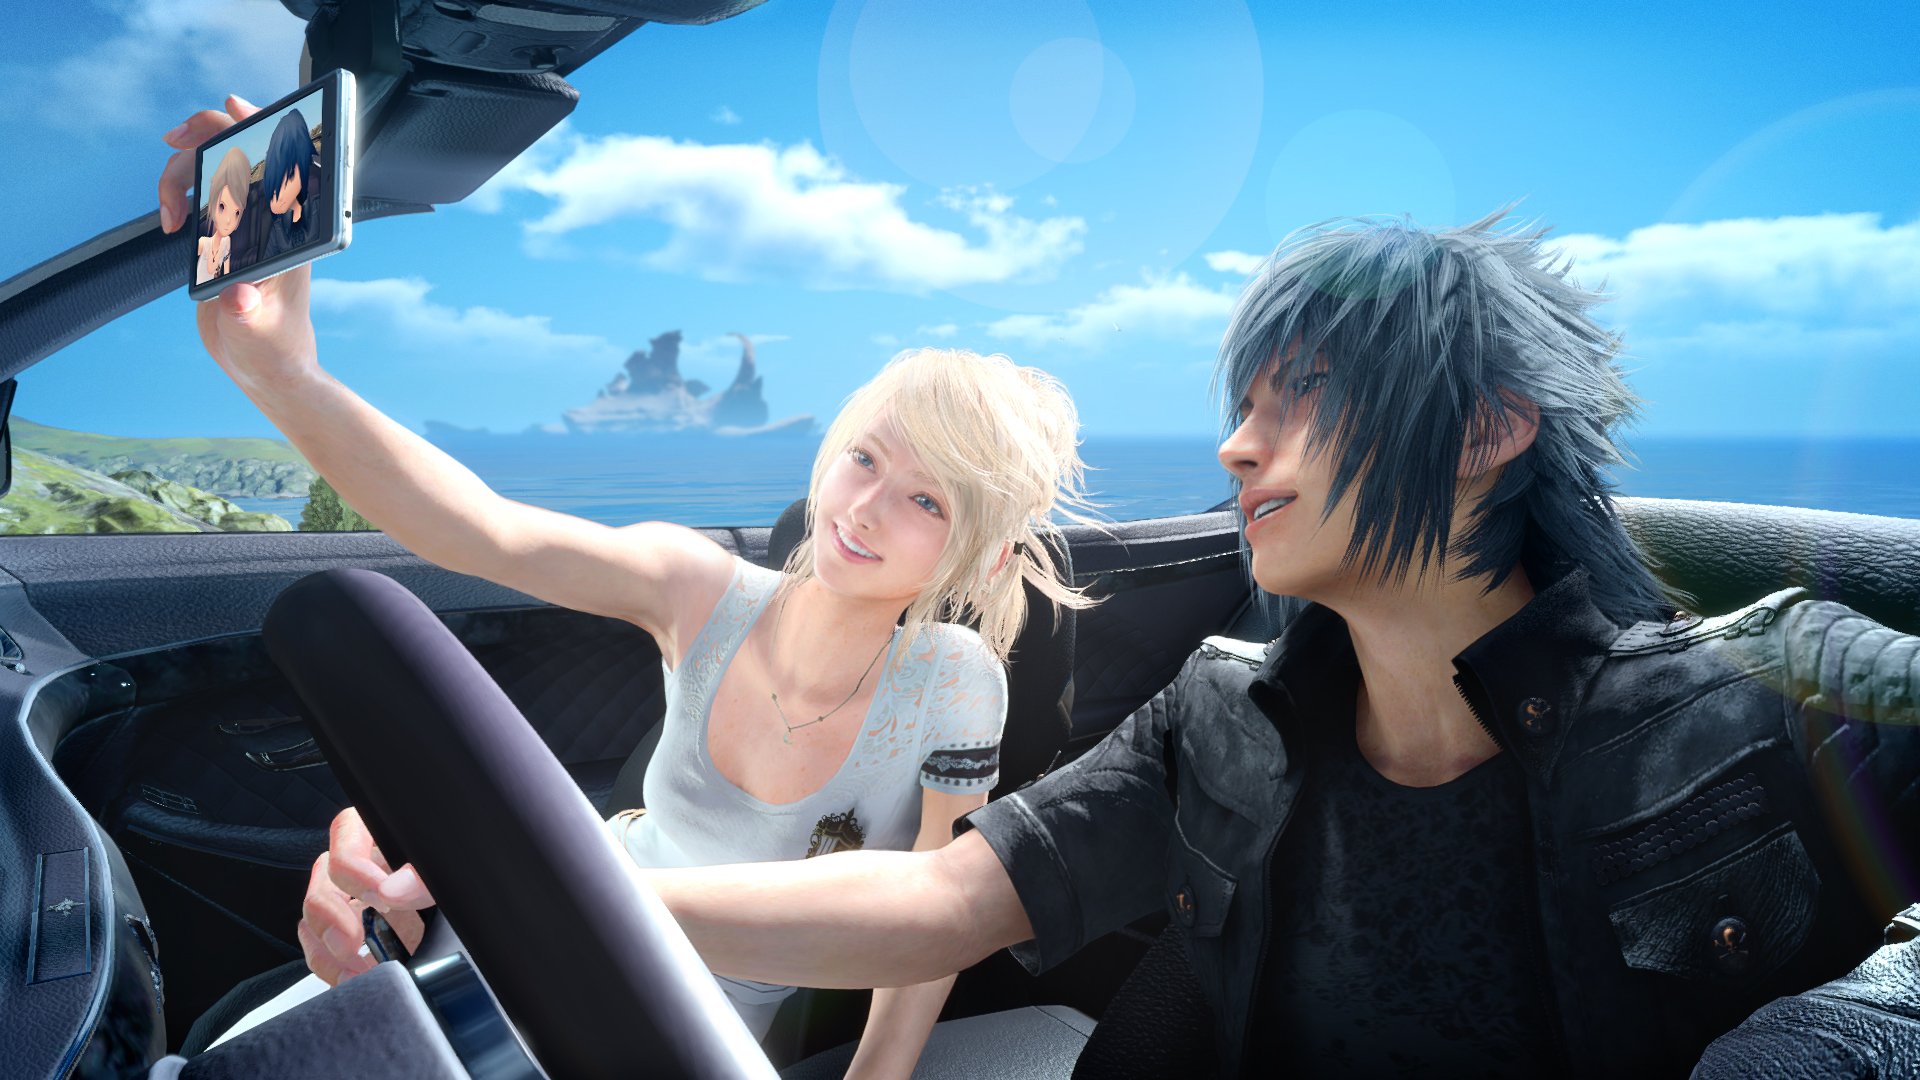 Final Fantasy Xv's Special Valentine's Day Pictures - Mods Final Fantasy Xv , HD Wallpaper & Backgrounds